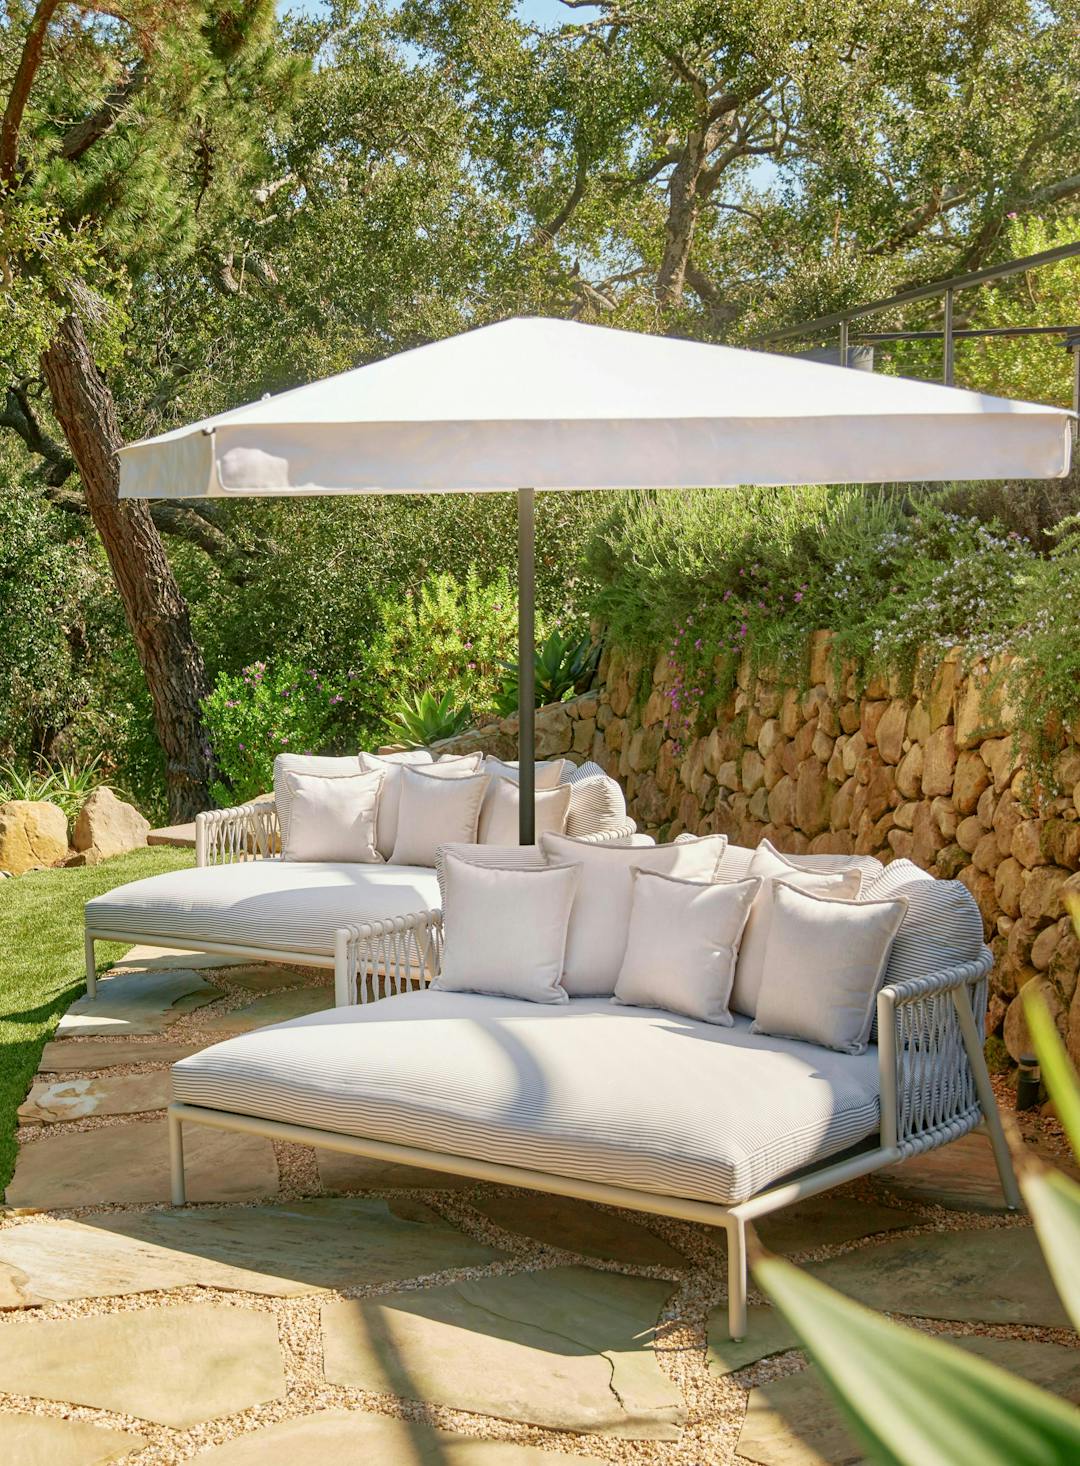 2 daybeds with white fabric and finish underneath white umbrella with stone wall behind. Oscar Daybeds by Ann Marie Vering.